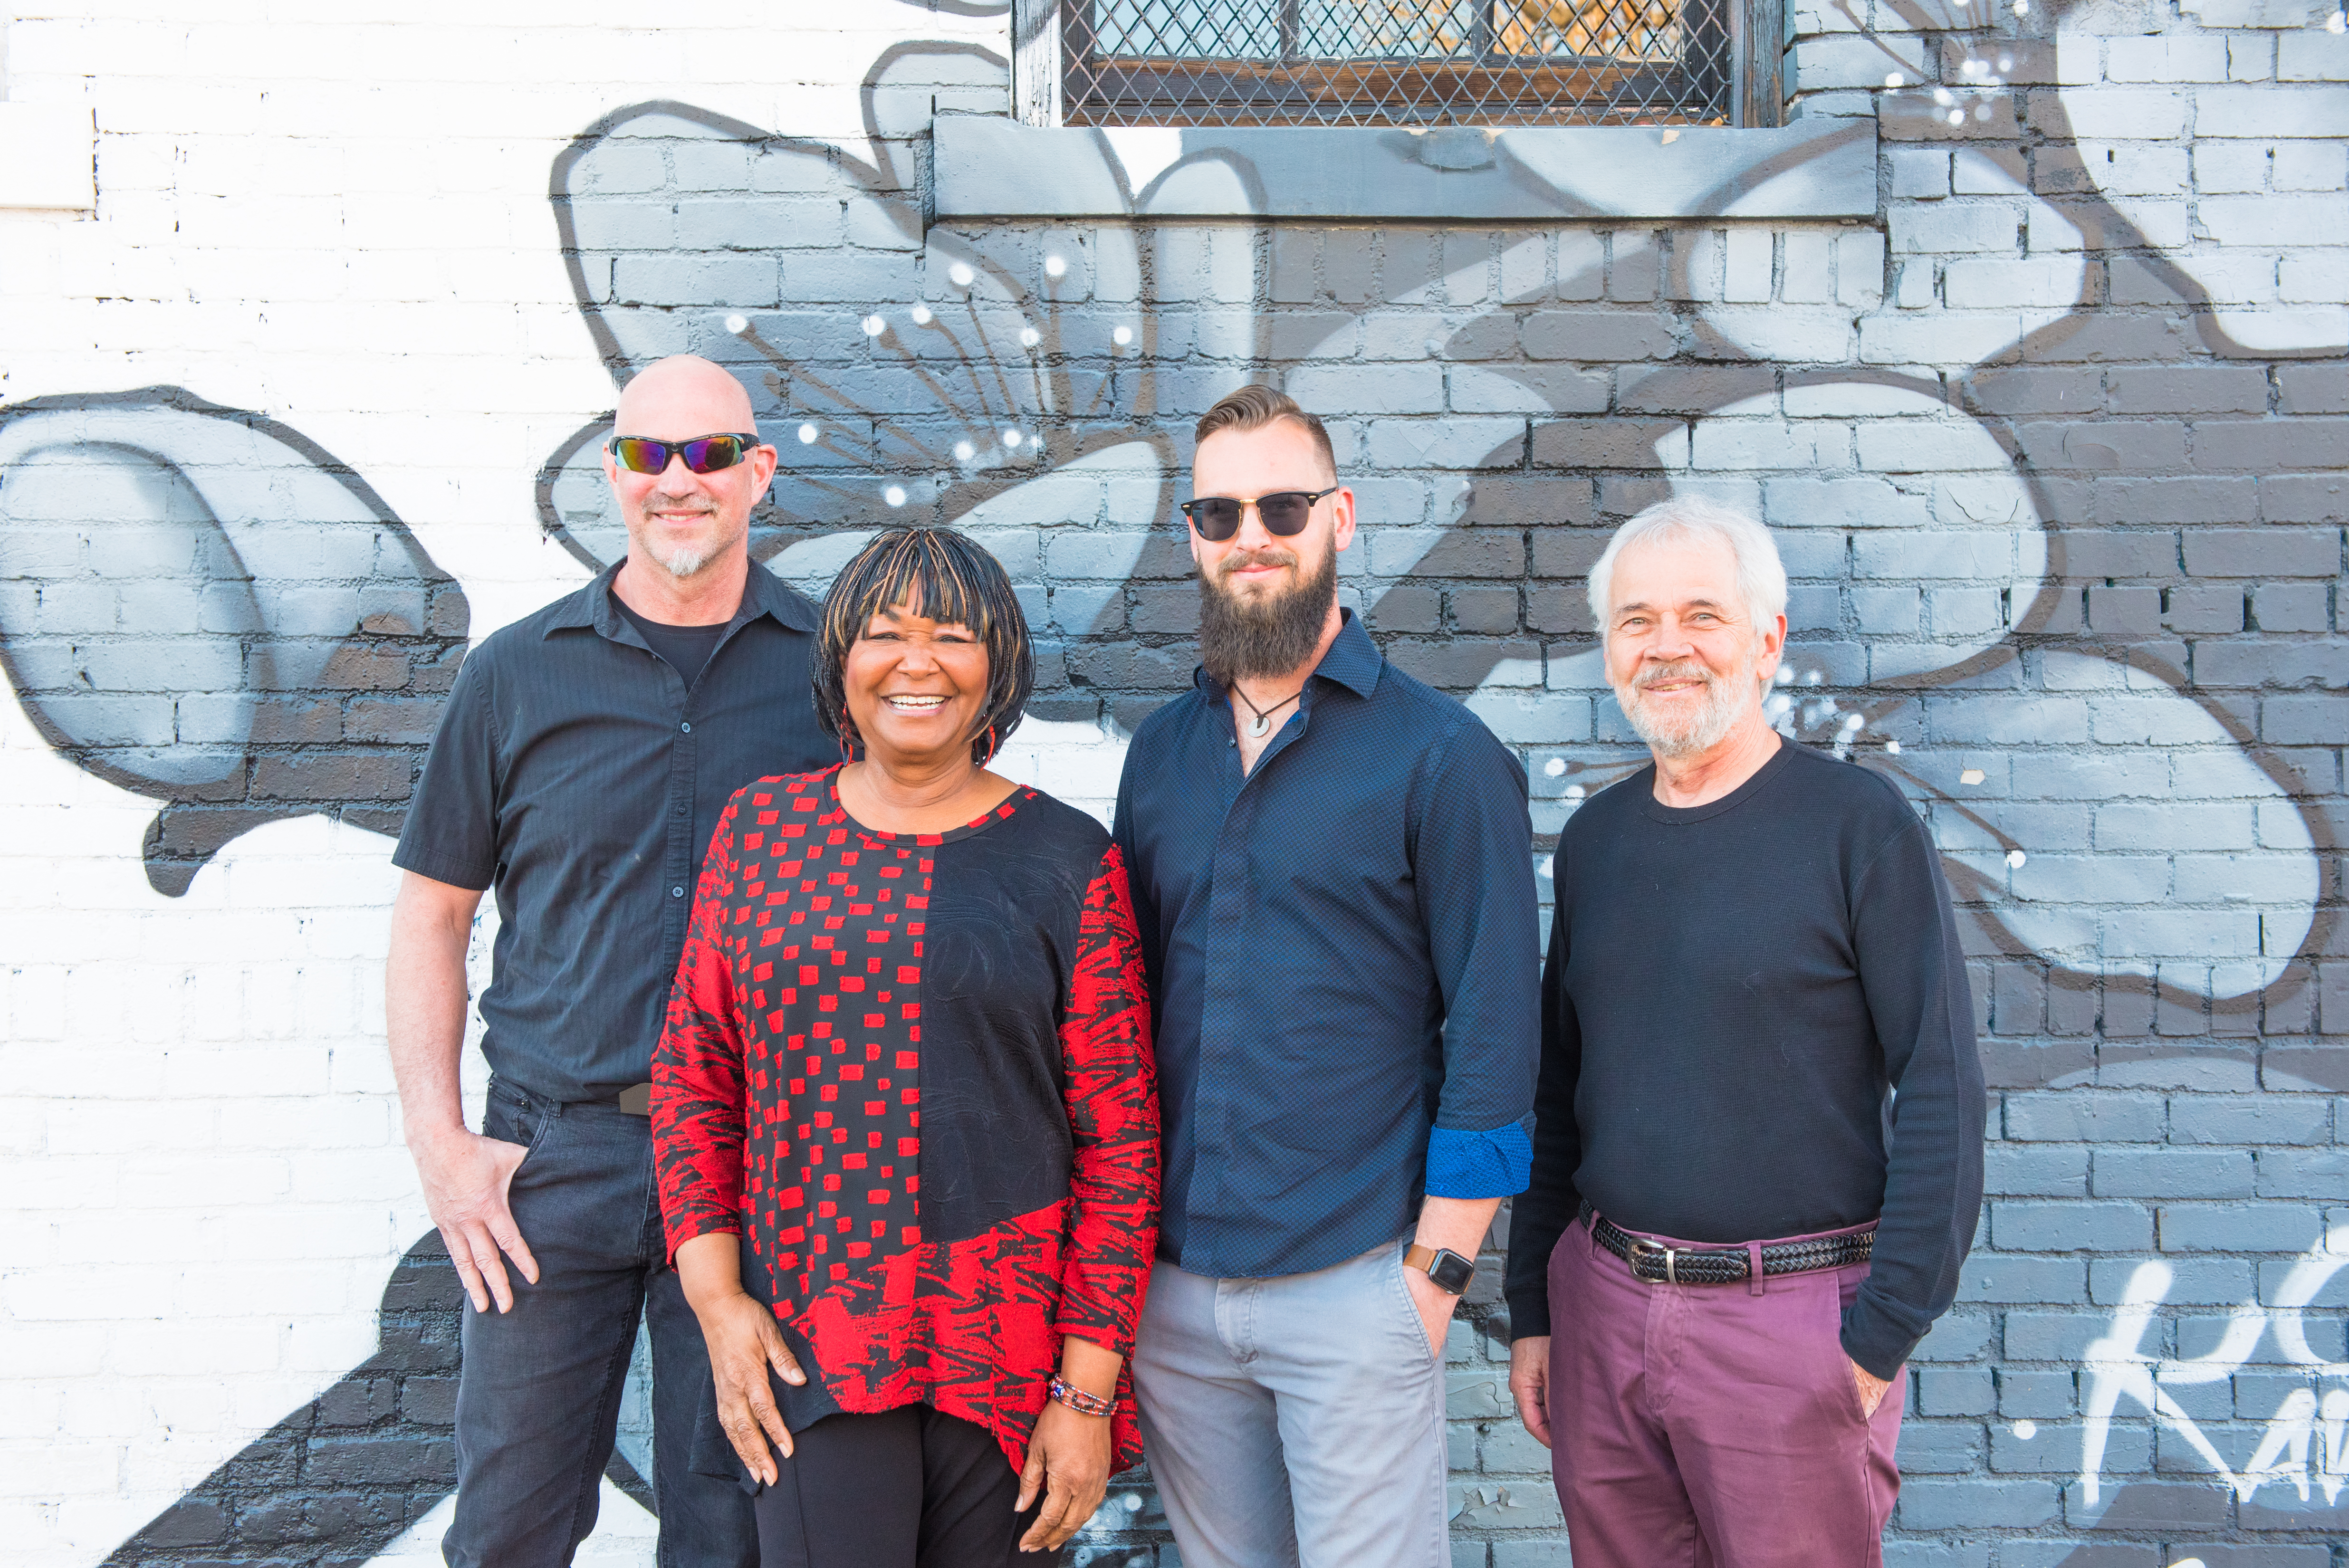 Hazel Miller and The Collective 4-piece members